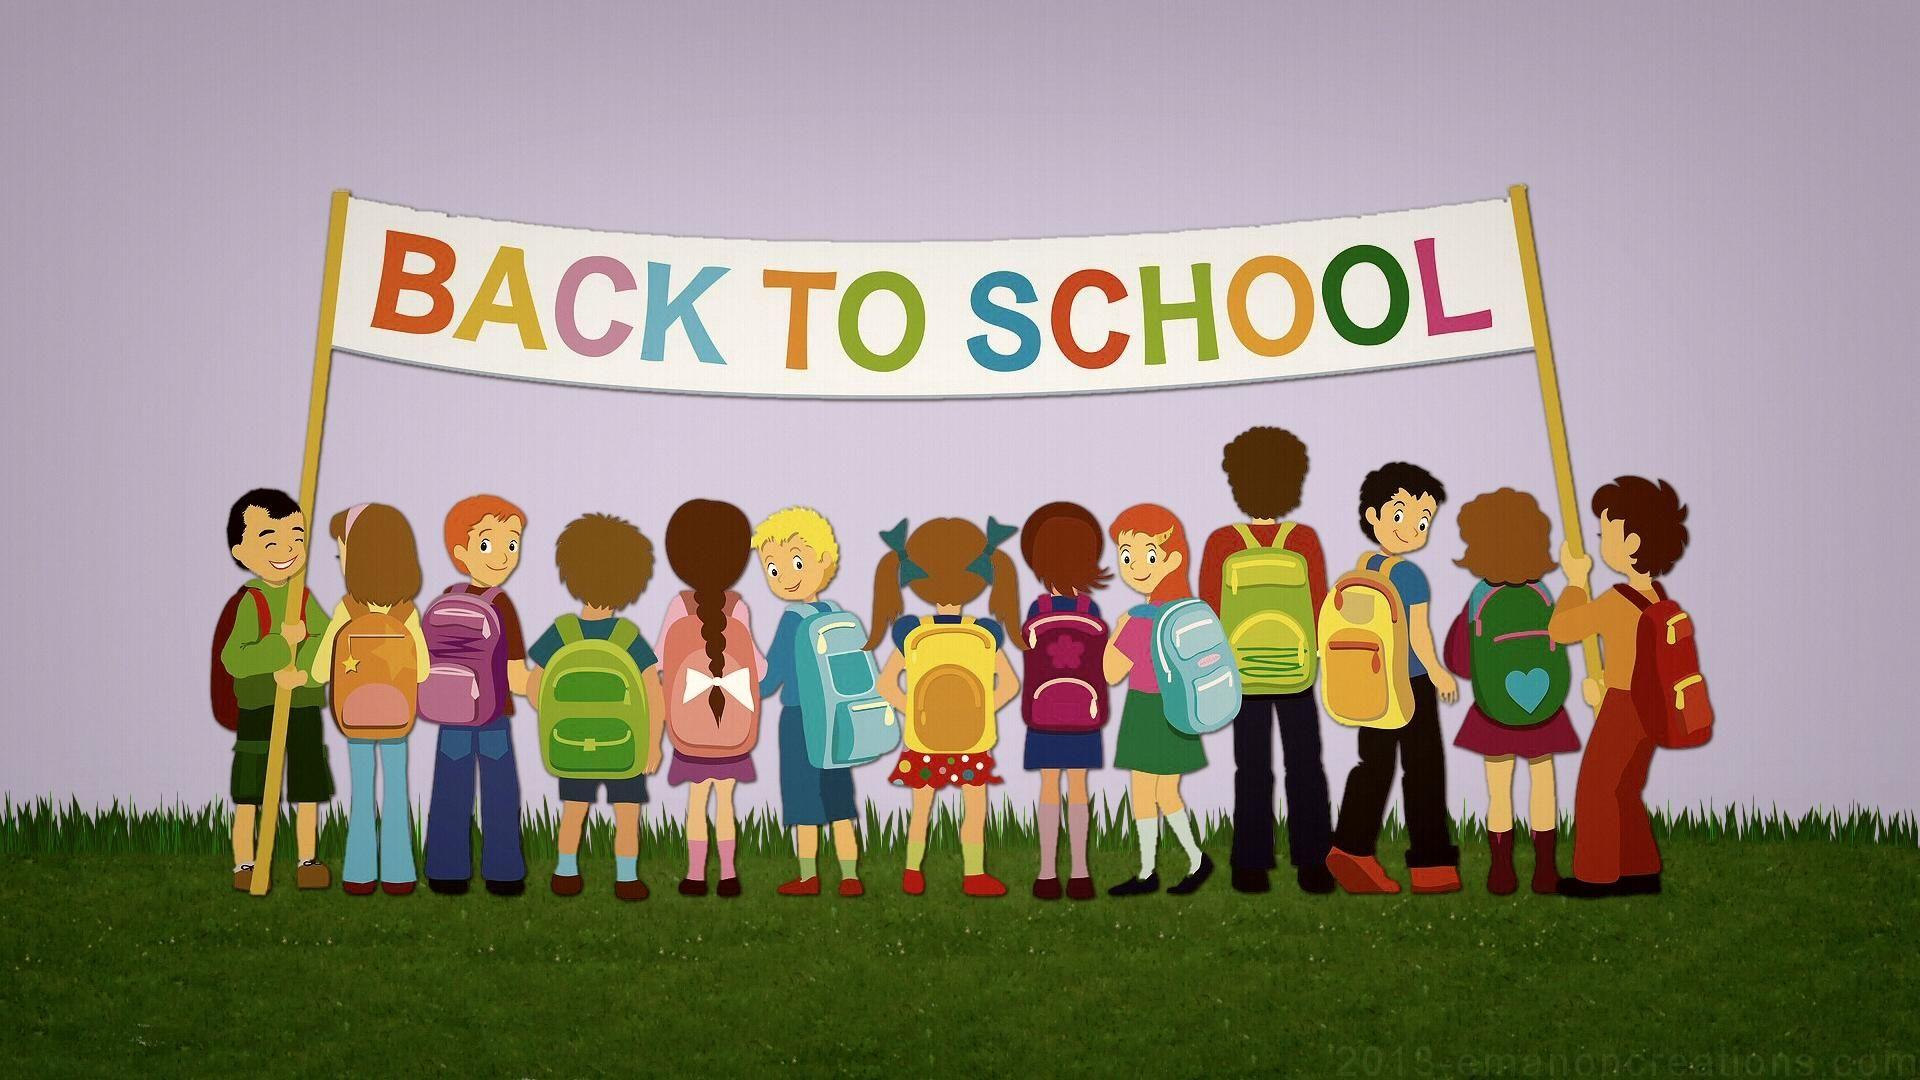 Back To School Wallpaper Background Is Cool Wallpaper. welcome to